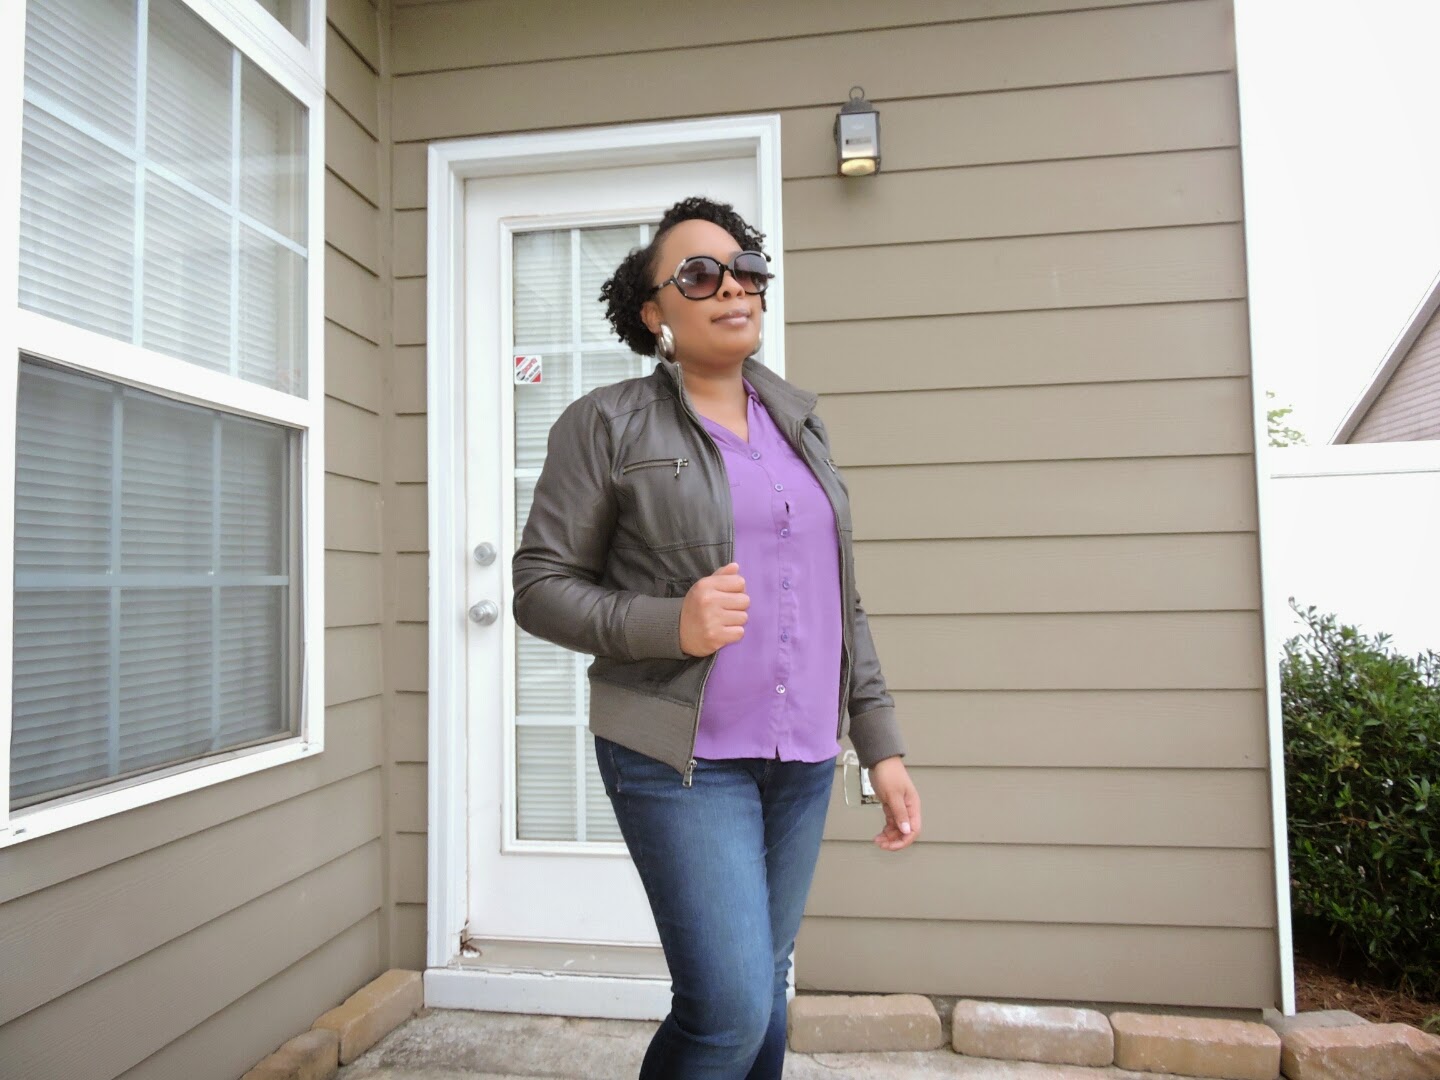 Wilsons Leather Jacket Review and Giveaway Ends 5/11  via www.productreviewmom.com